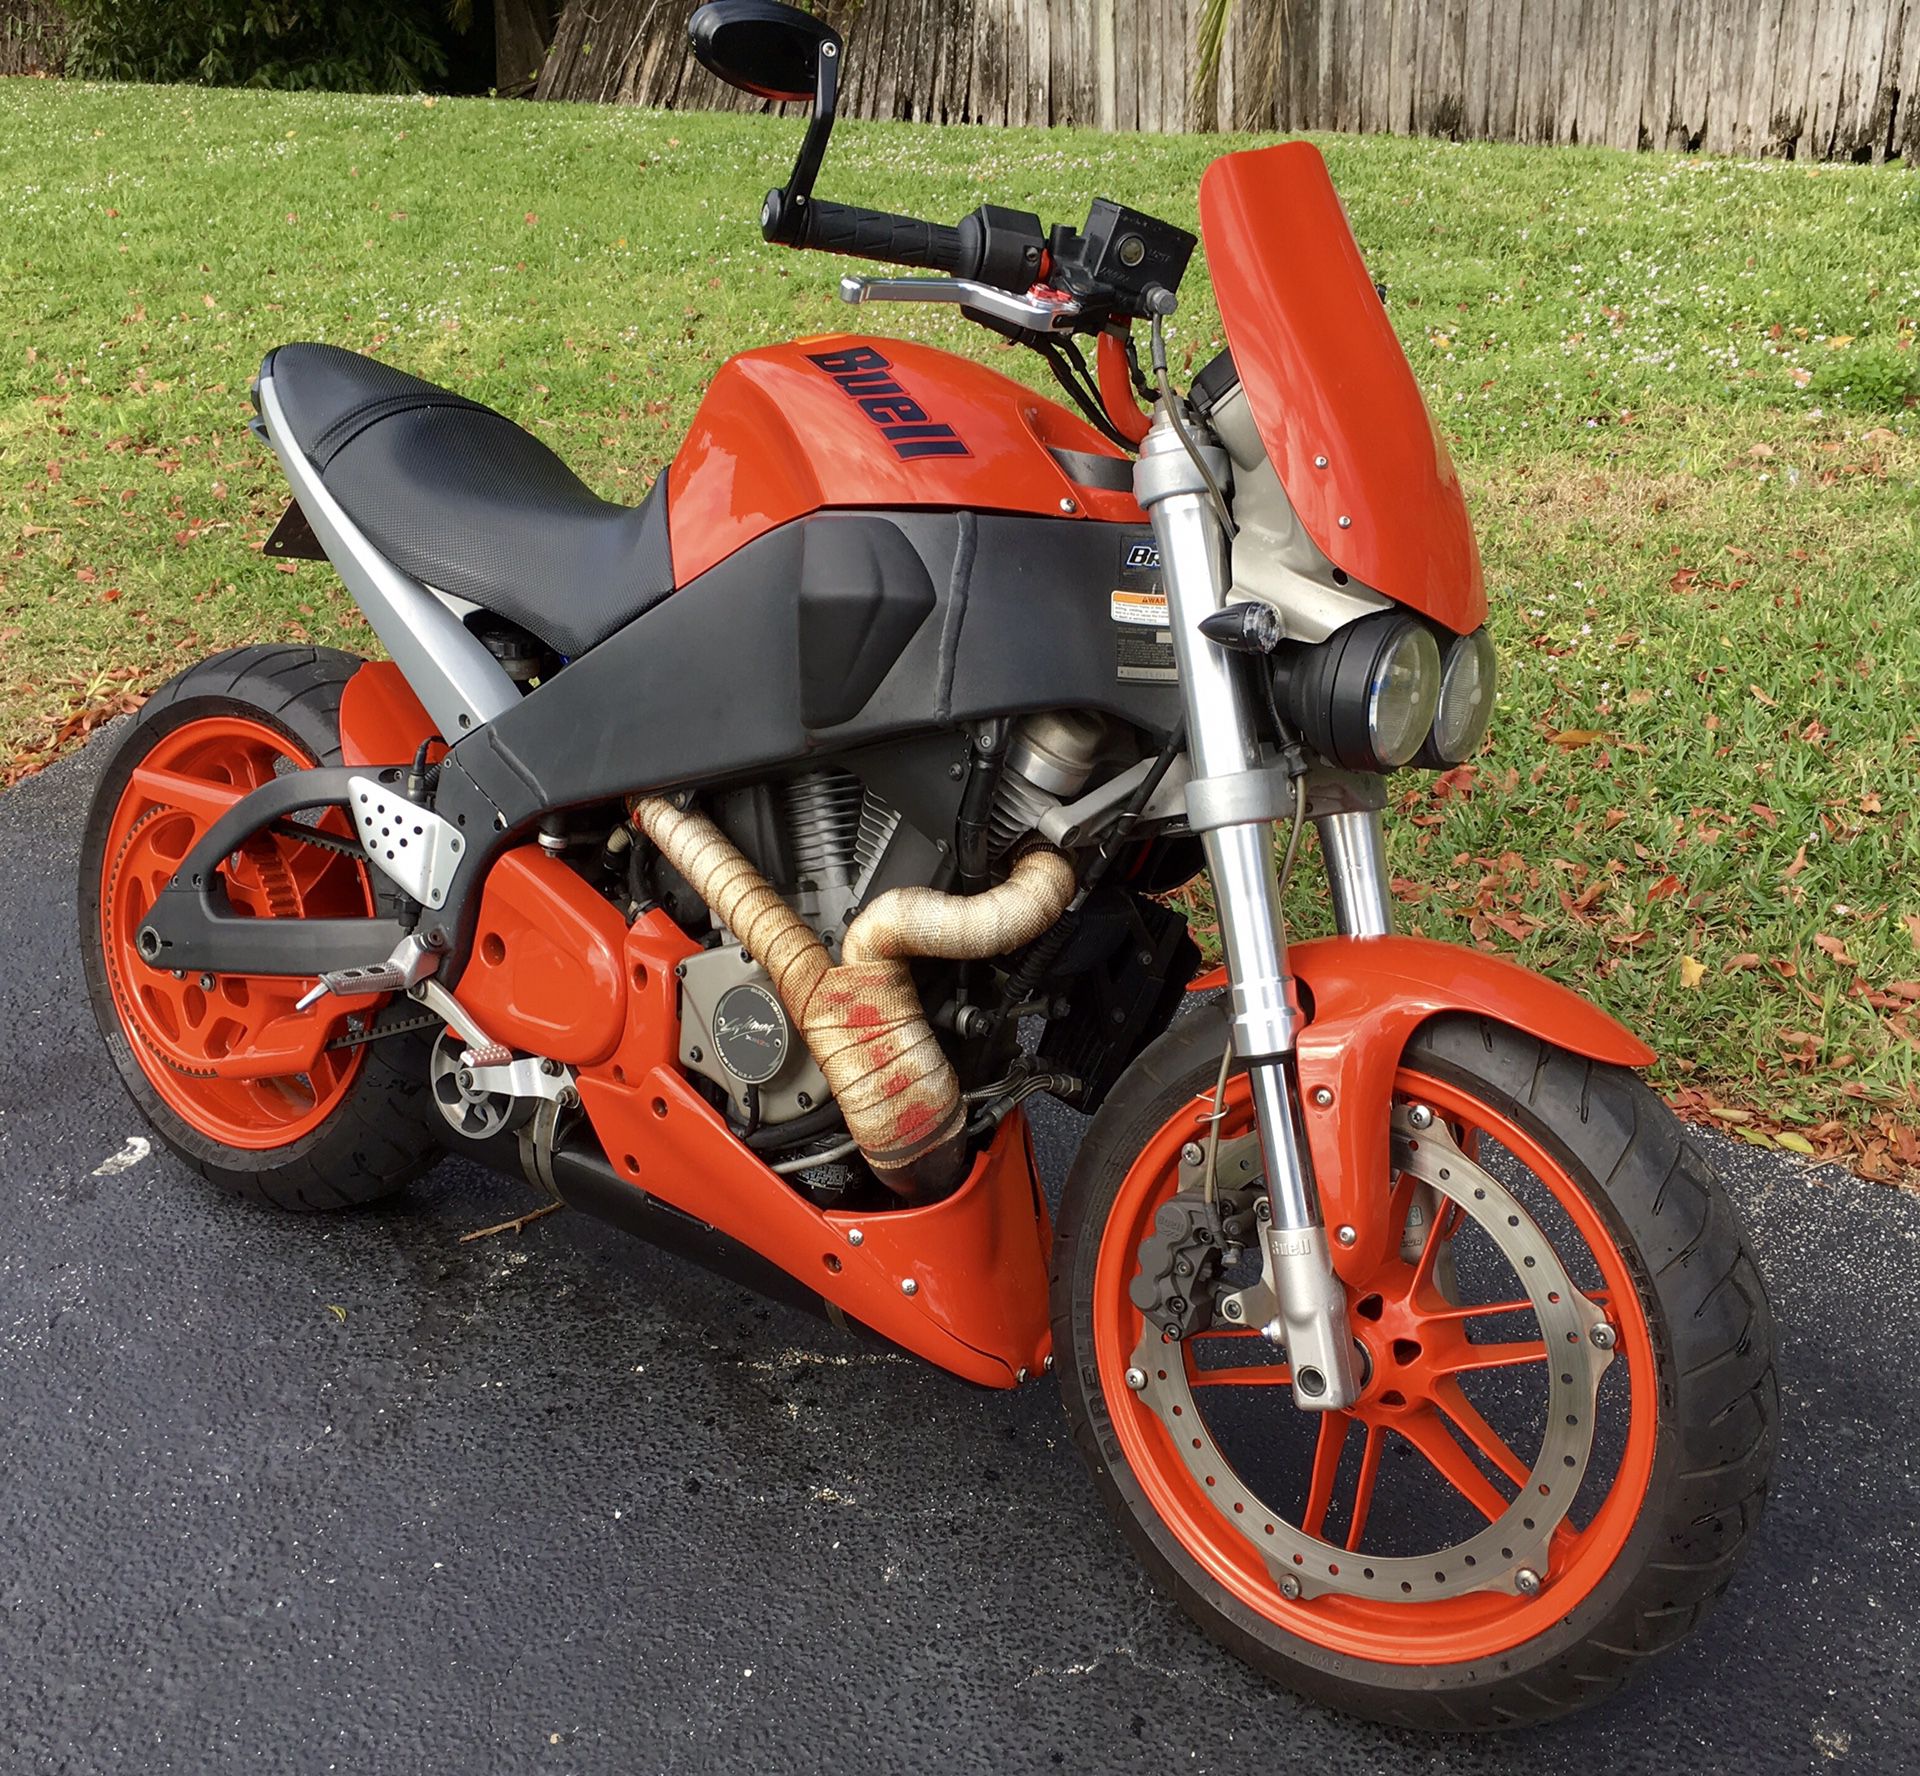 Buell Lightning XB12s..Rare and Clean Motorcycle